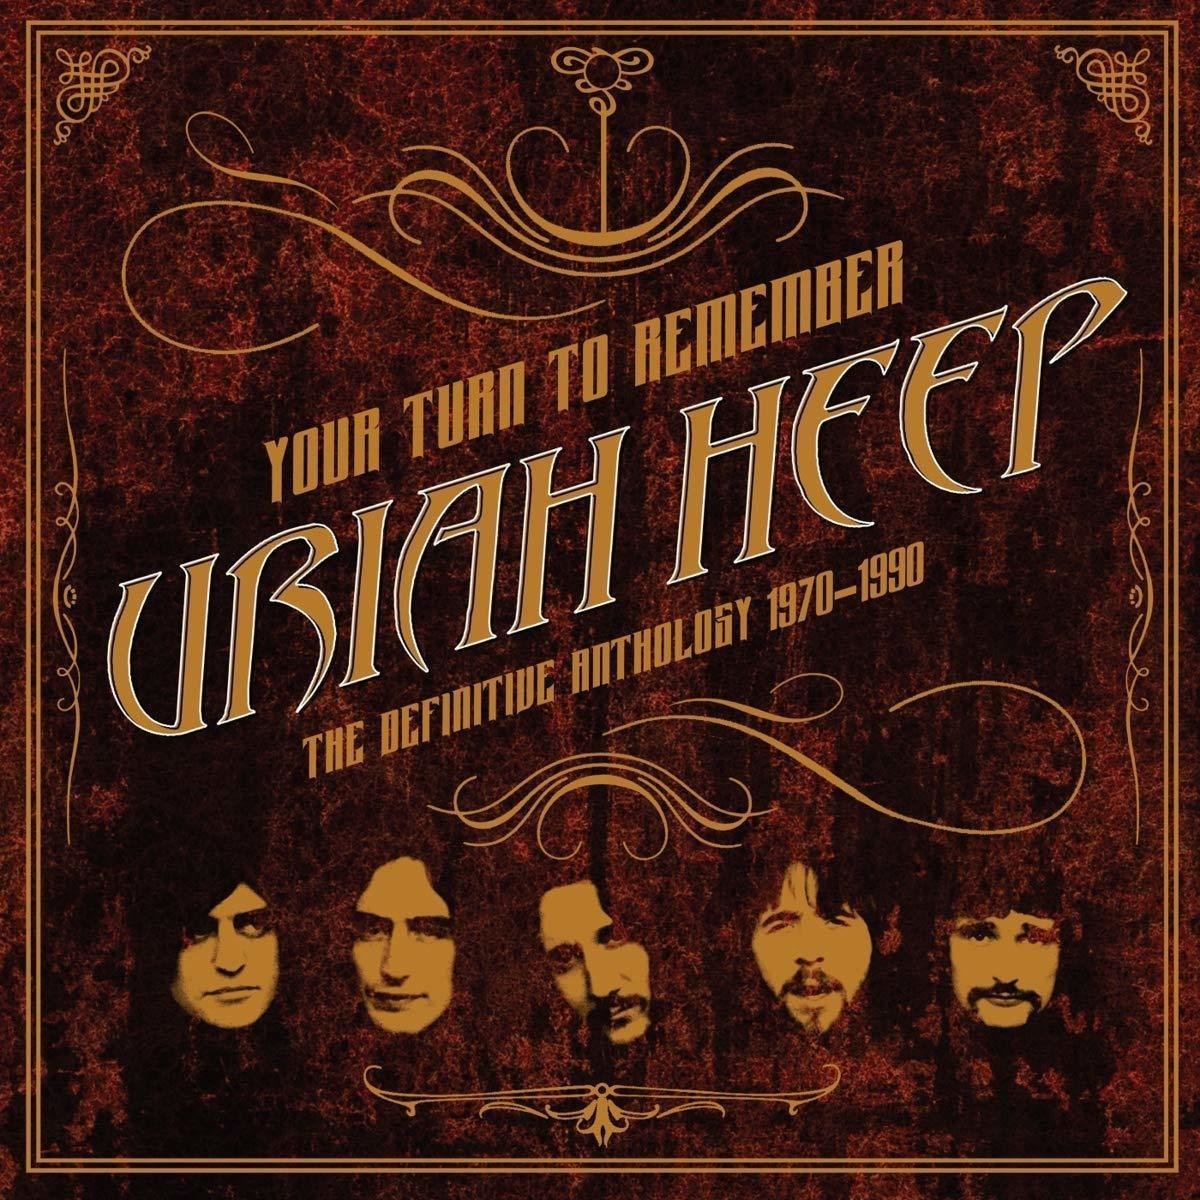 Disque vinyle Uriah Heep - Your Turn To Remember: The Definitive Anthology 1970-1990 (LP)